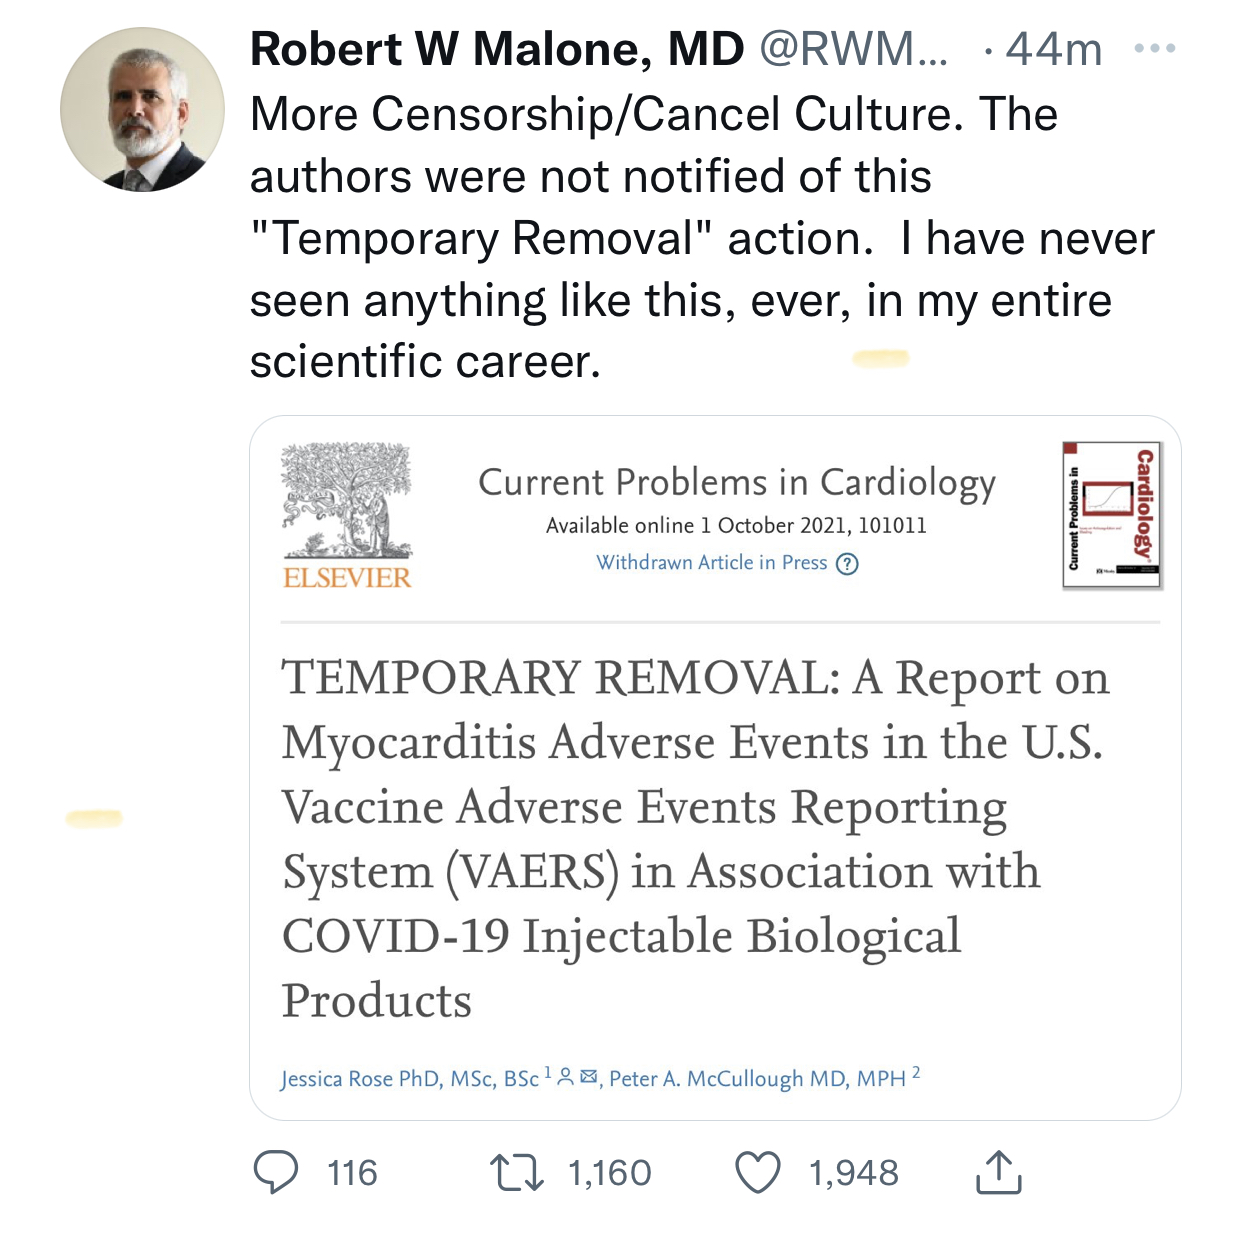 The image is a screenshot of a Tweet posted by Dr. Robert W. Malone, inventor of the mRNA vaccine technology. 

In the Tweet, Malone said, "More Censorhip/Cancel Culture. The authors were not notified of this "Temporary Removal" action. I have never seen anything like this, ever, in my entire scientific career." 

He attached a screenshot of the article from Current Problems in Cardiology which now has the following notice. 

TEMPORARY REMOVAL: A Report on Myocarditis Adverse Events in the U.S. Vaccine Adverse Events Reporting System (VAERS) in Association with COVID-19 Injectable Biological Products